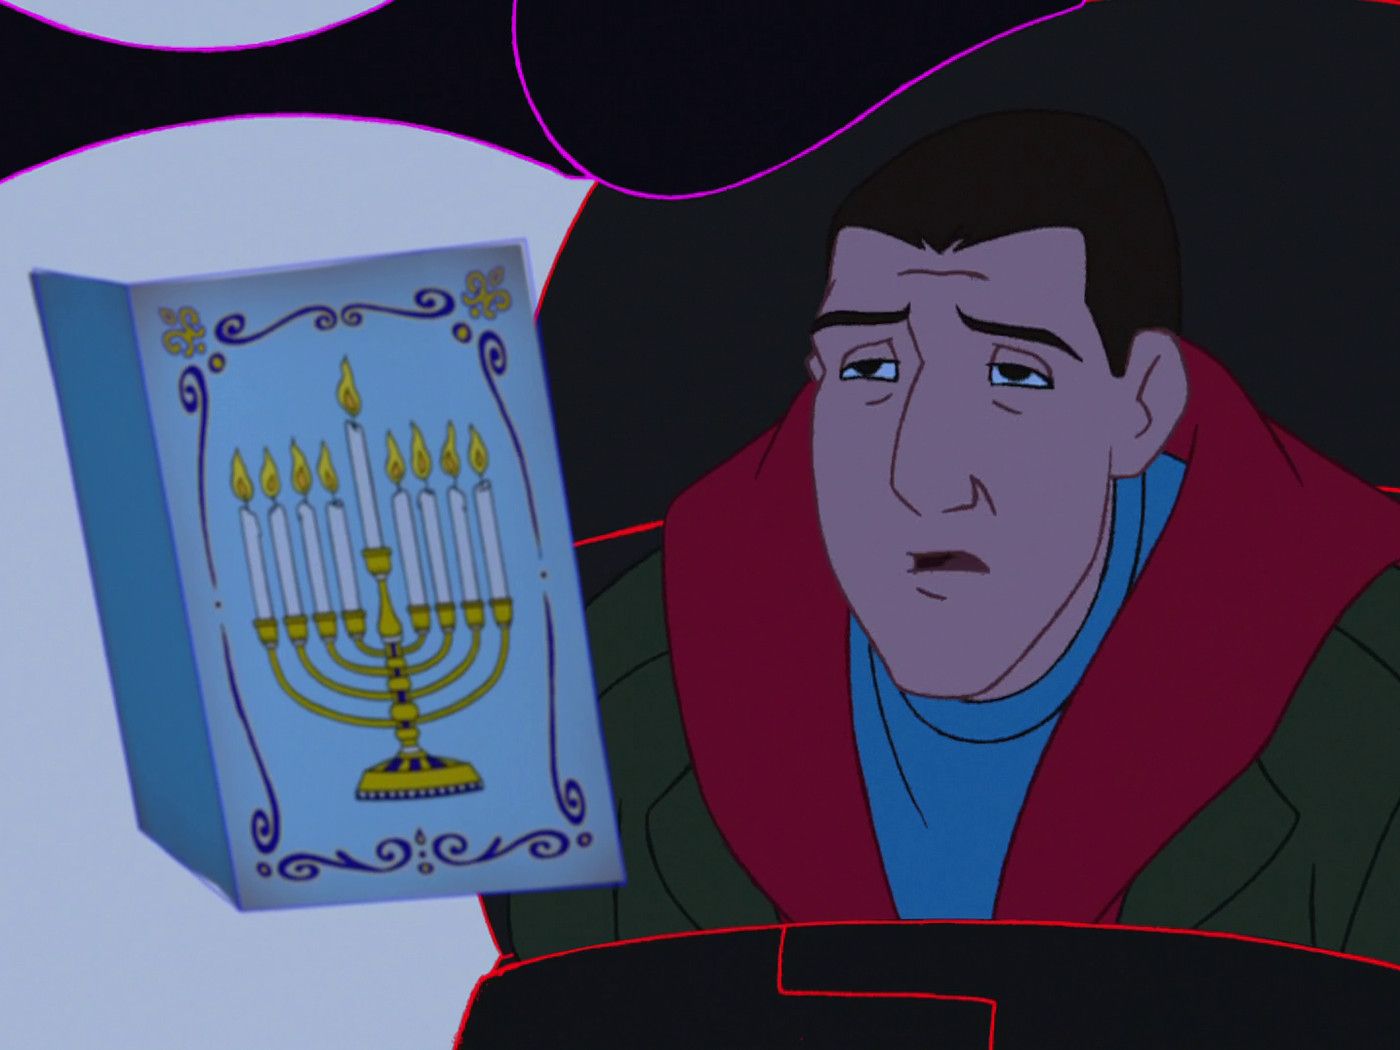 Why are there so few Hanukkah movies?